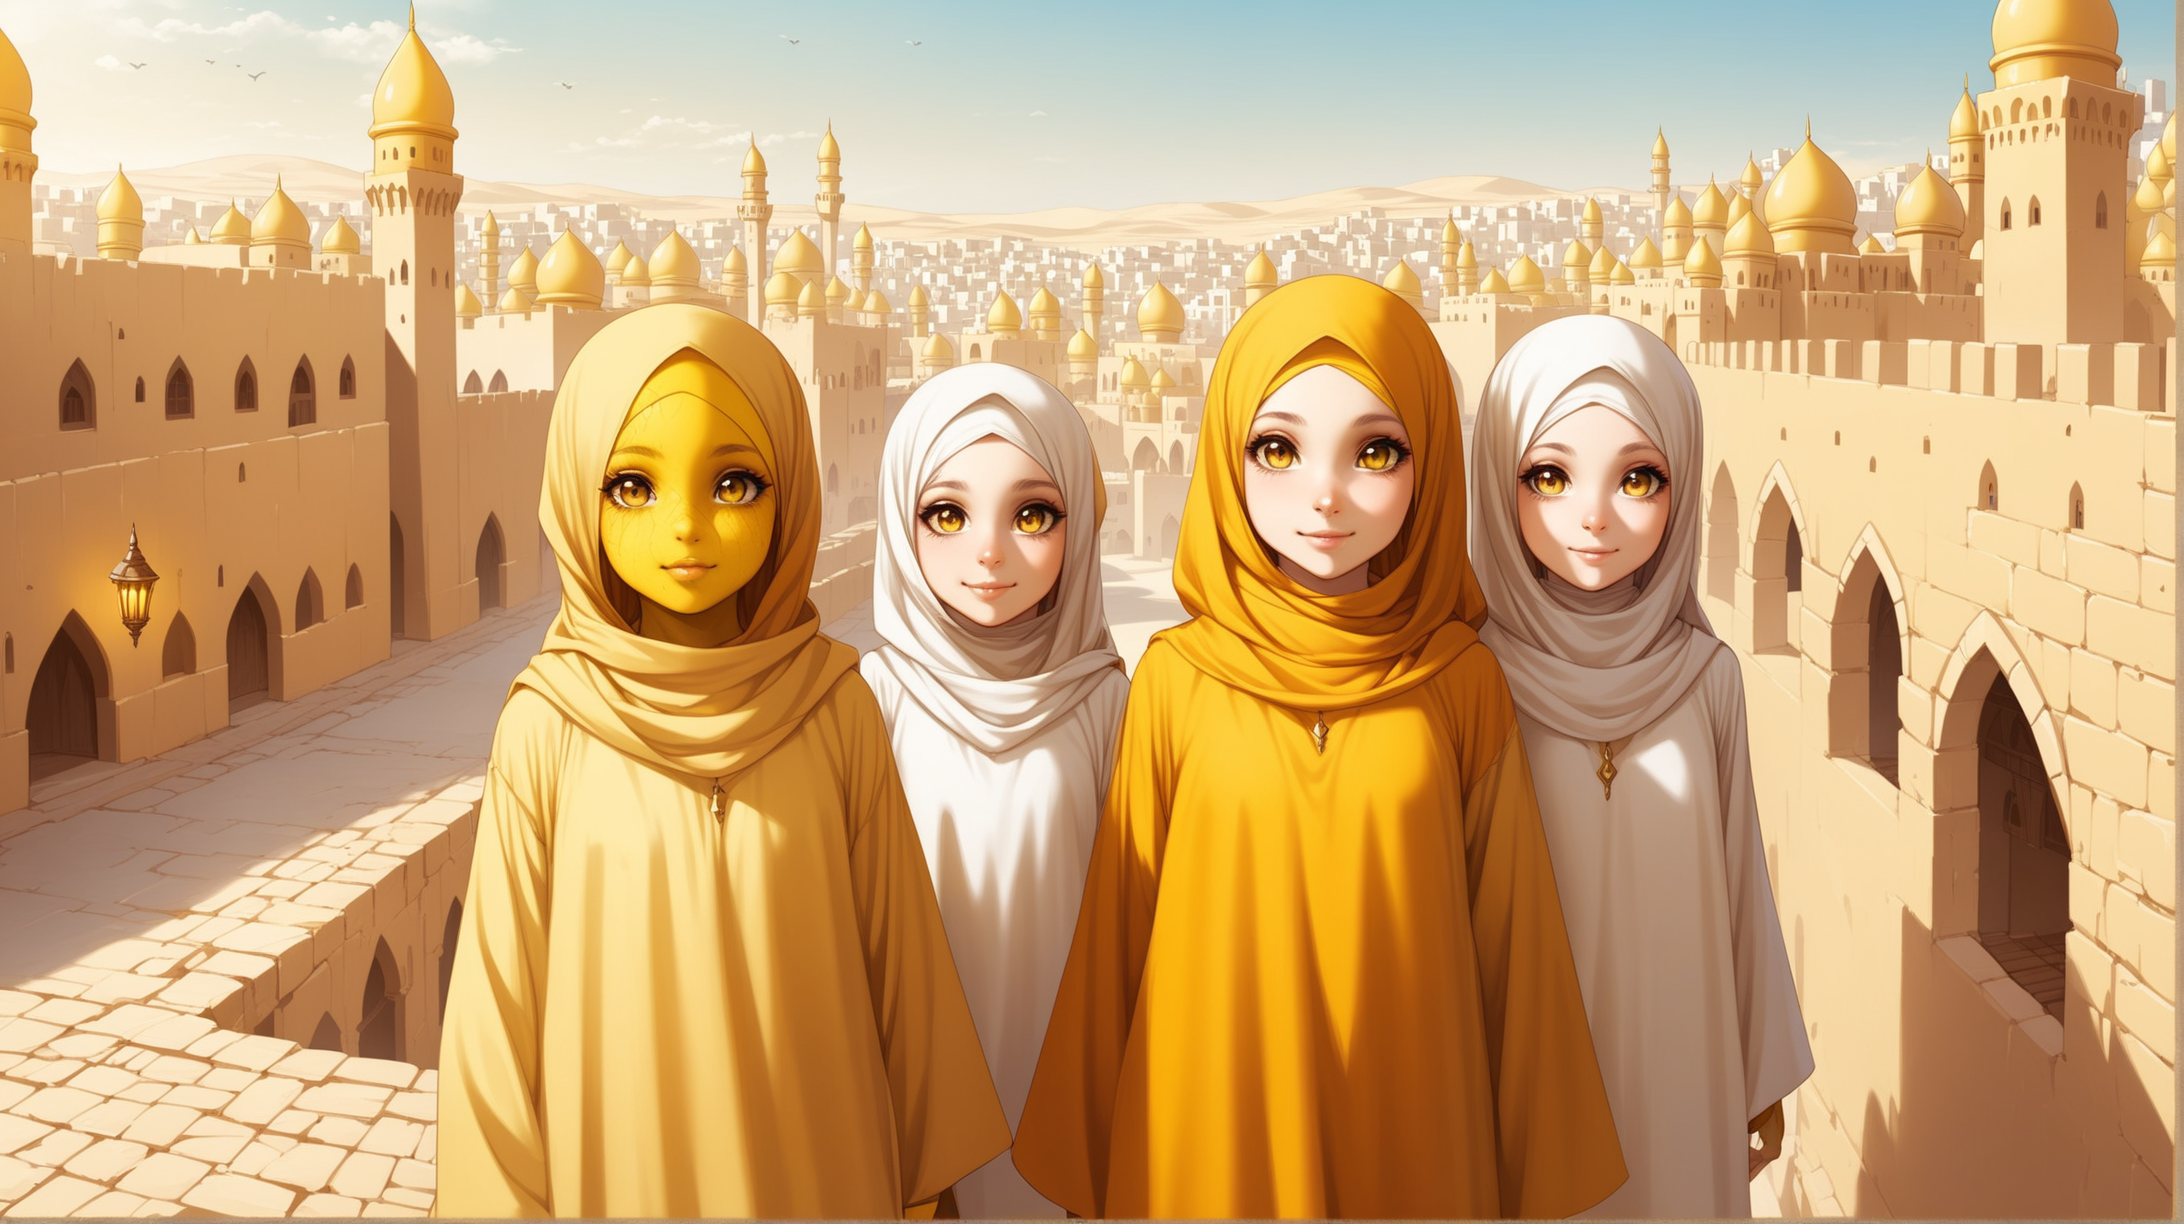 Young Yellow Gnome Girls Exploring an Arabic Medieval Fantasy City